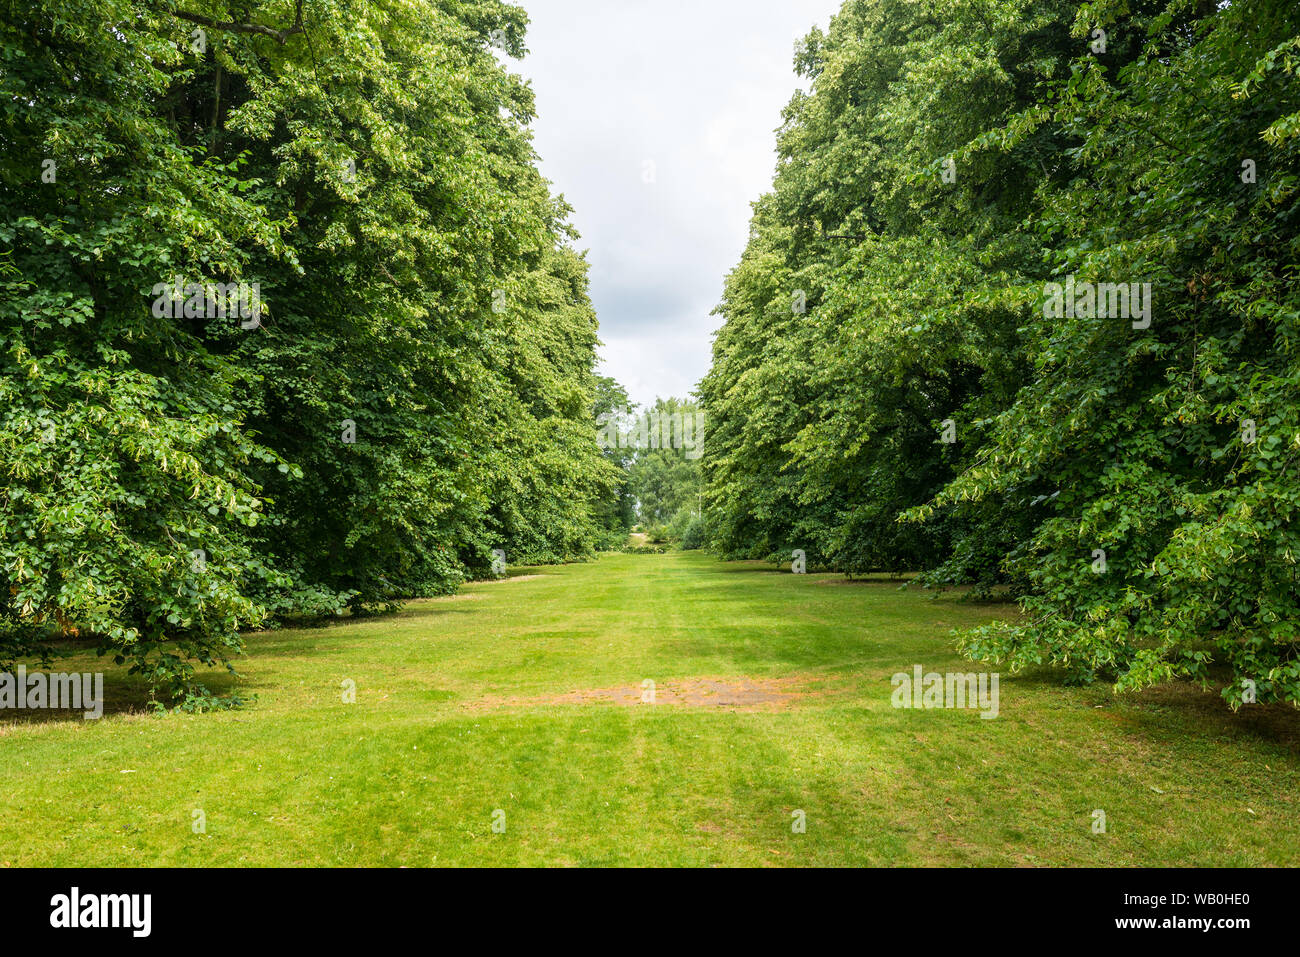 Large green path trail track in outdoor park entering a wild forest surrounded by high trees Stock Photo